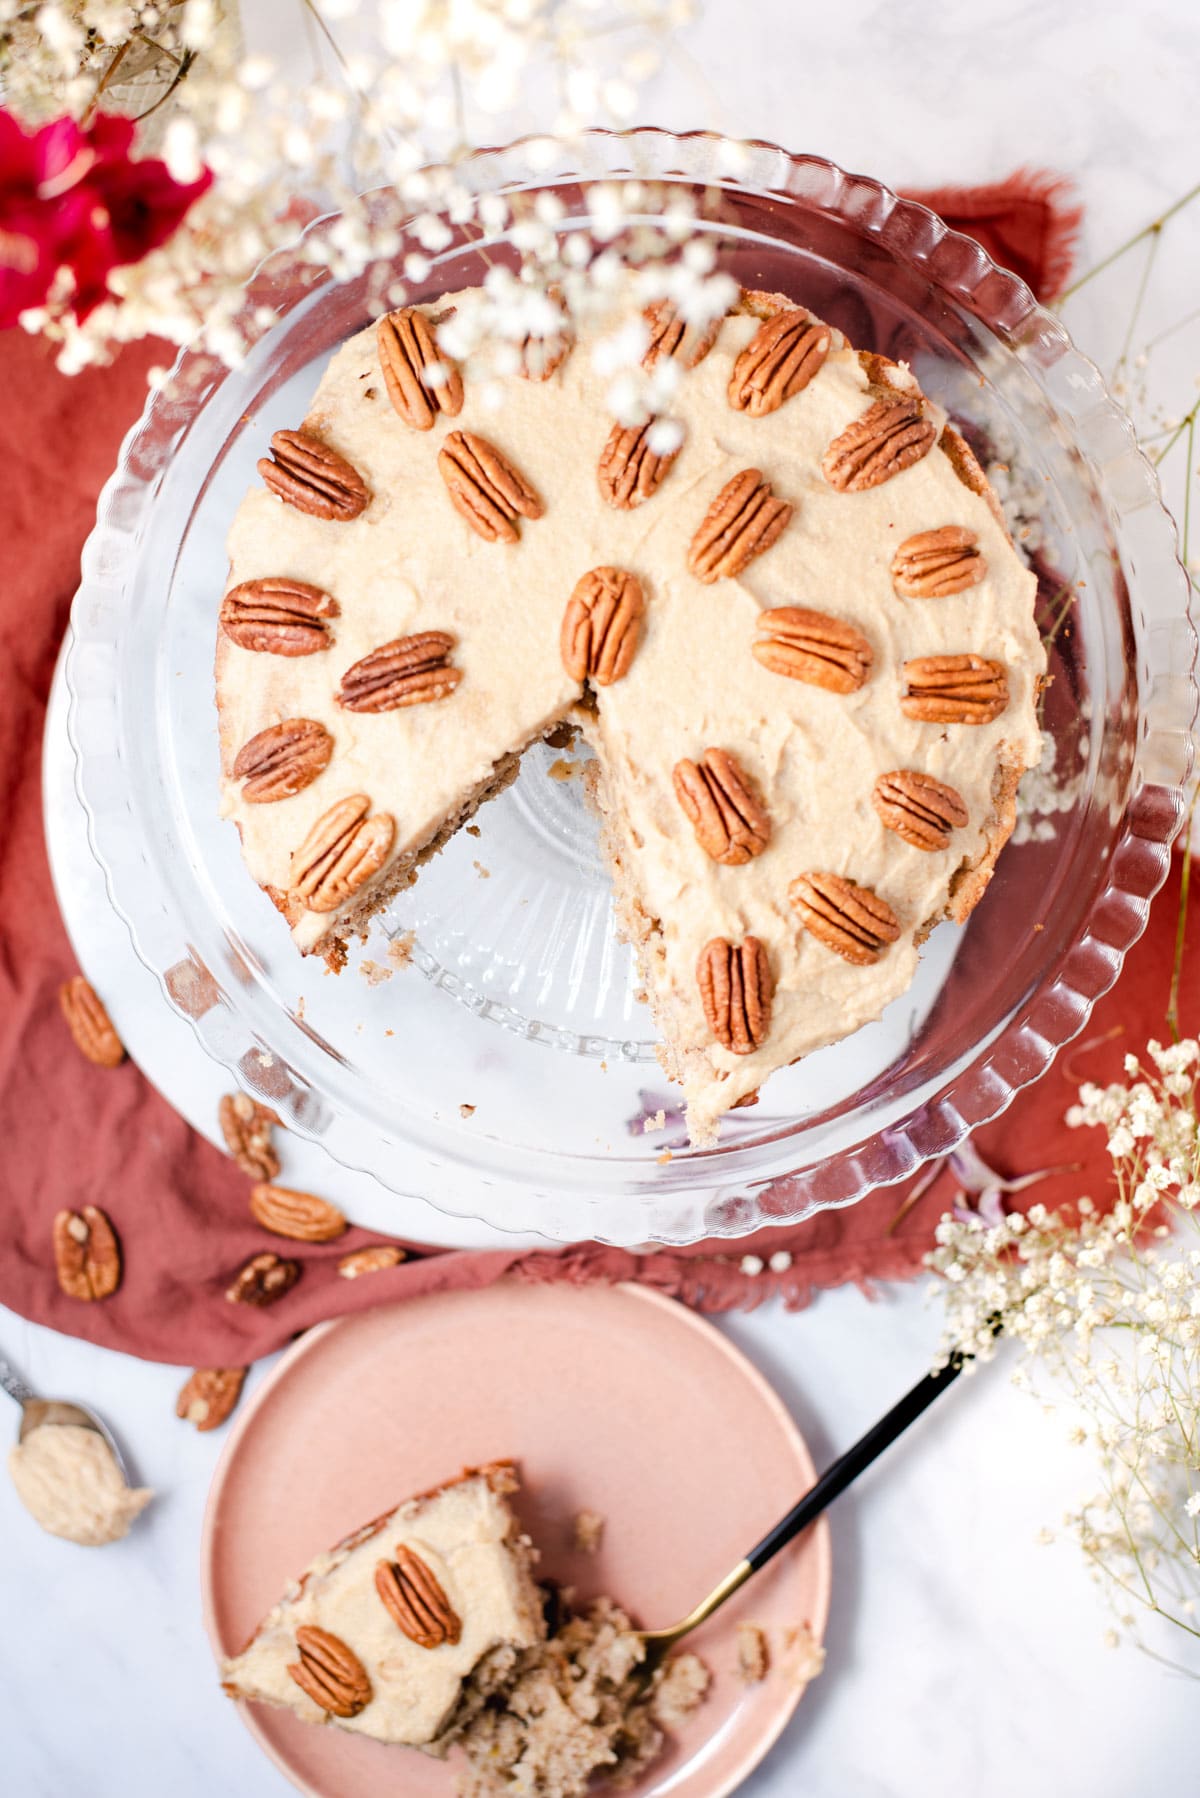 Overhead view of cake topped with pecans on a glass cake stand.